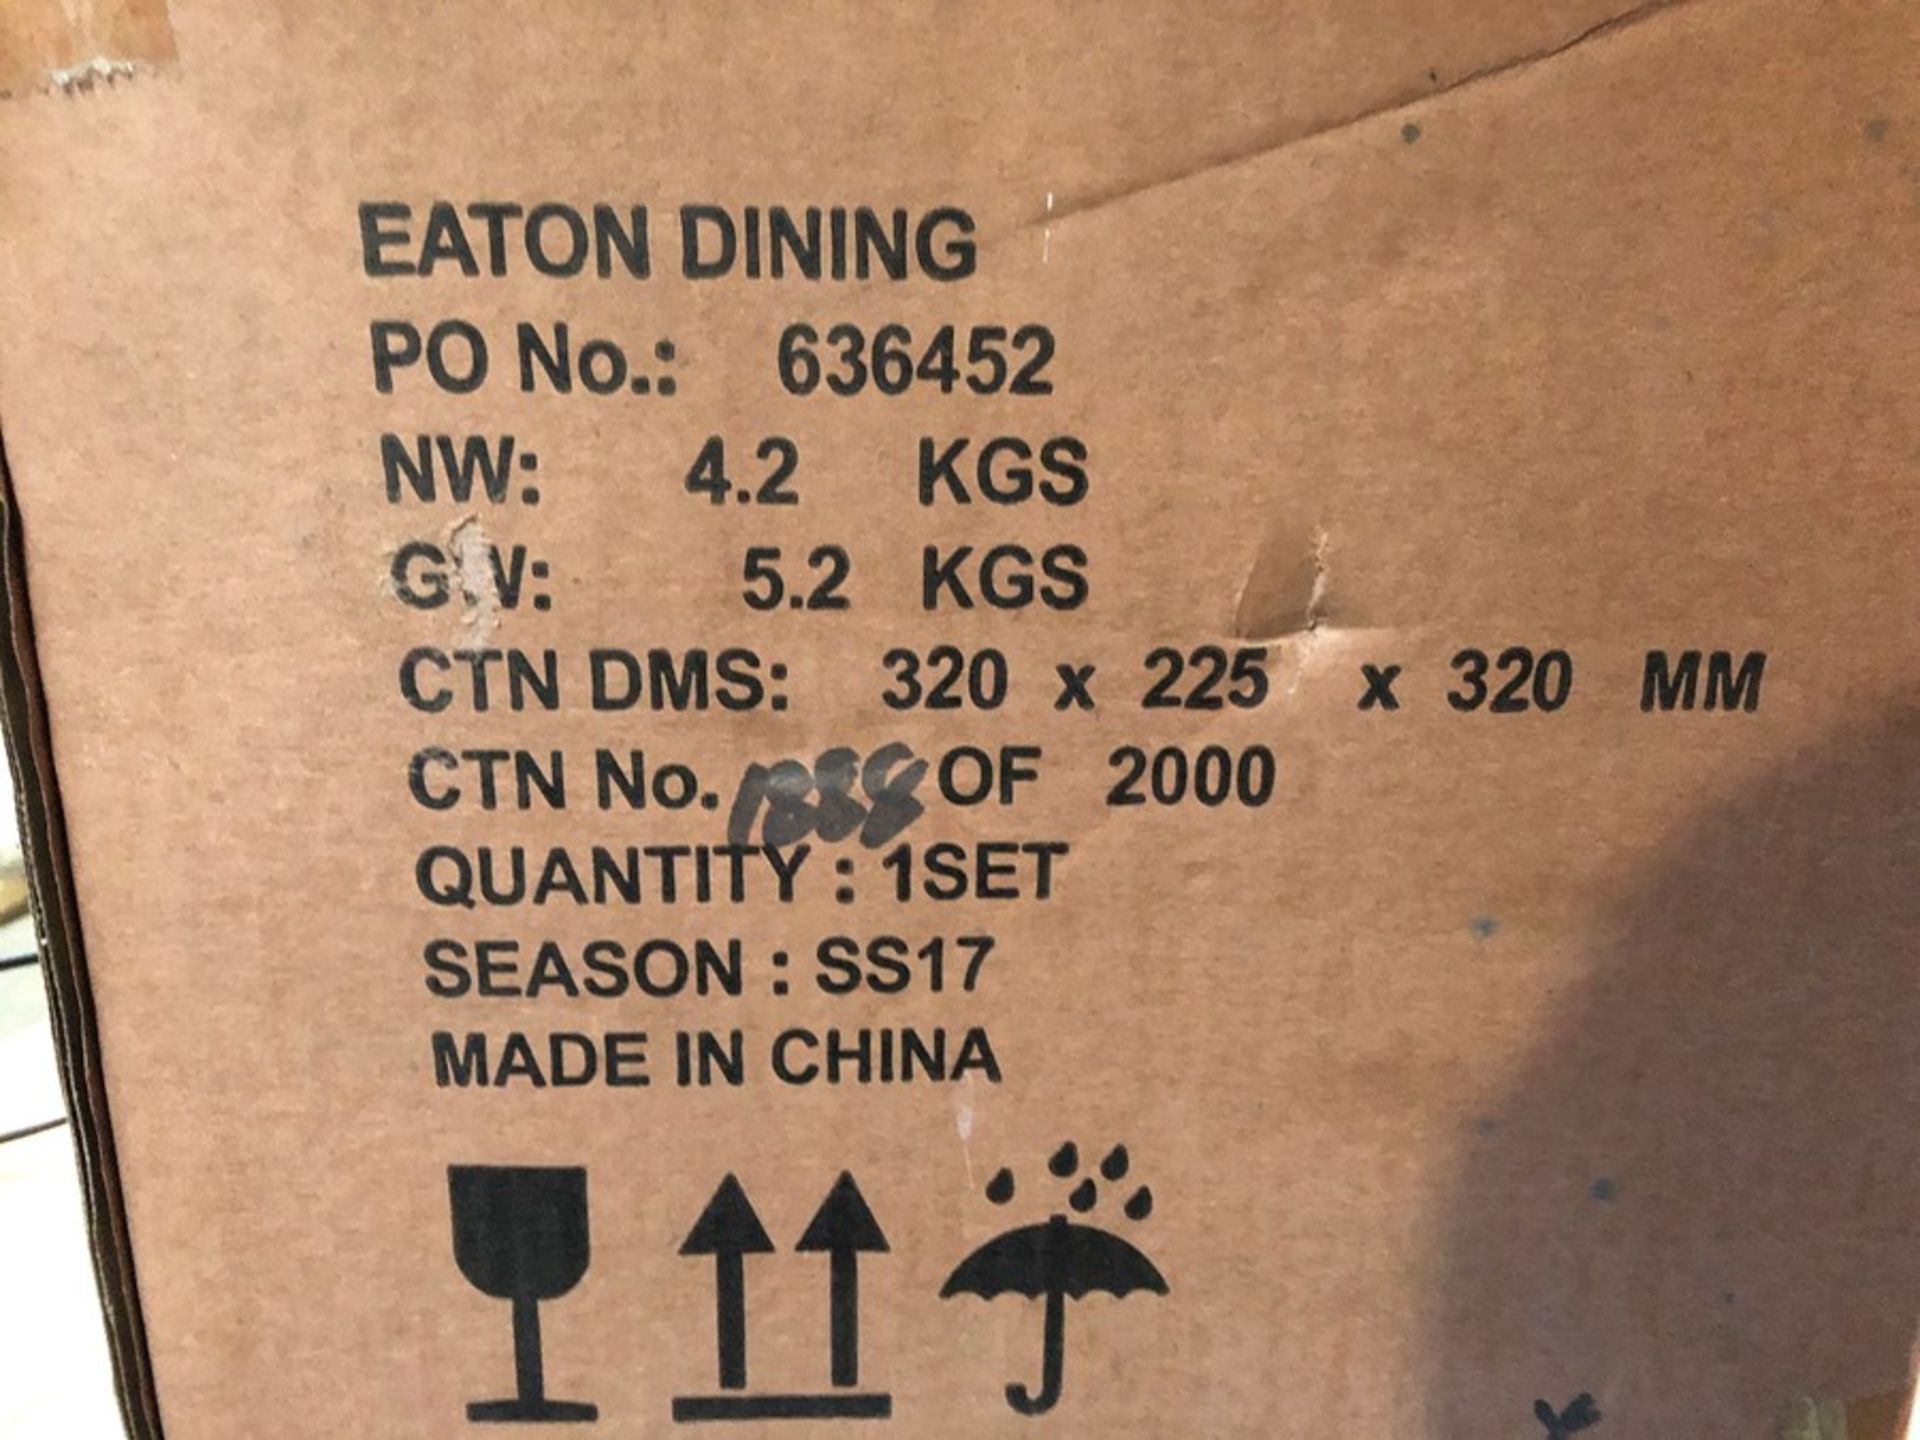 1 BOXED EATON DINING SET (PUBLIC VIEWING AVAILABLE)